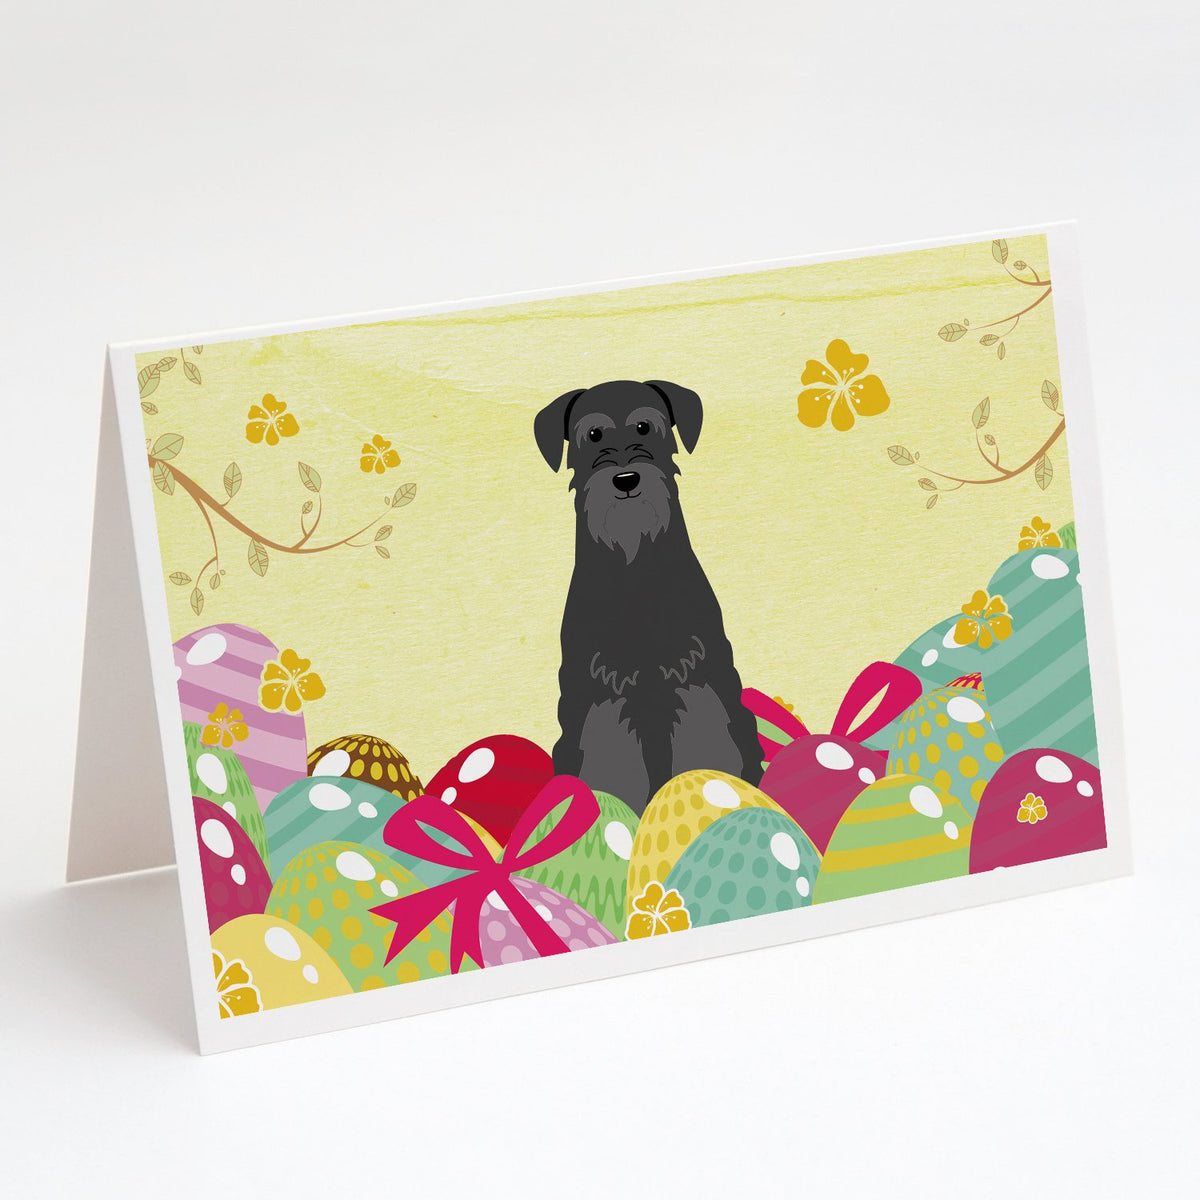 Buy this Easter Eggs Standard Schnauzer Black Greeting Cards and Envelopes Pack of 8